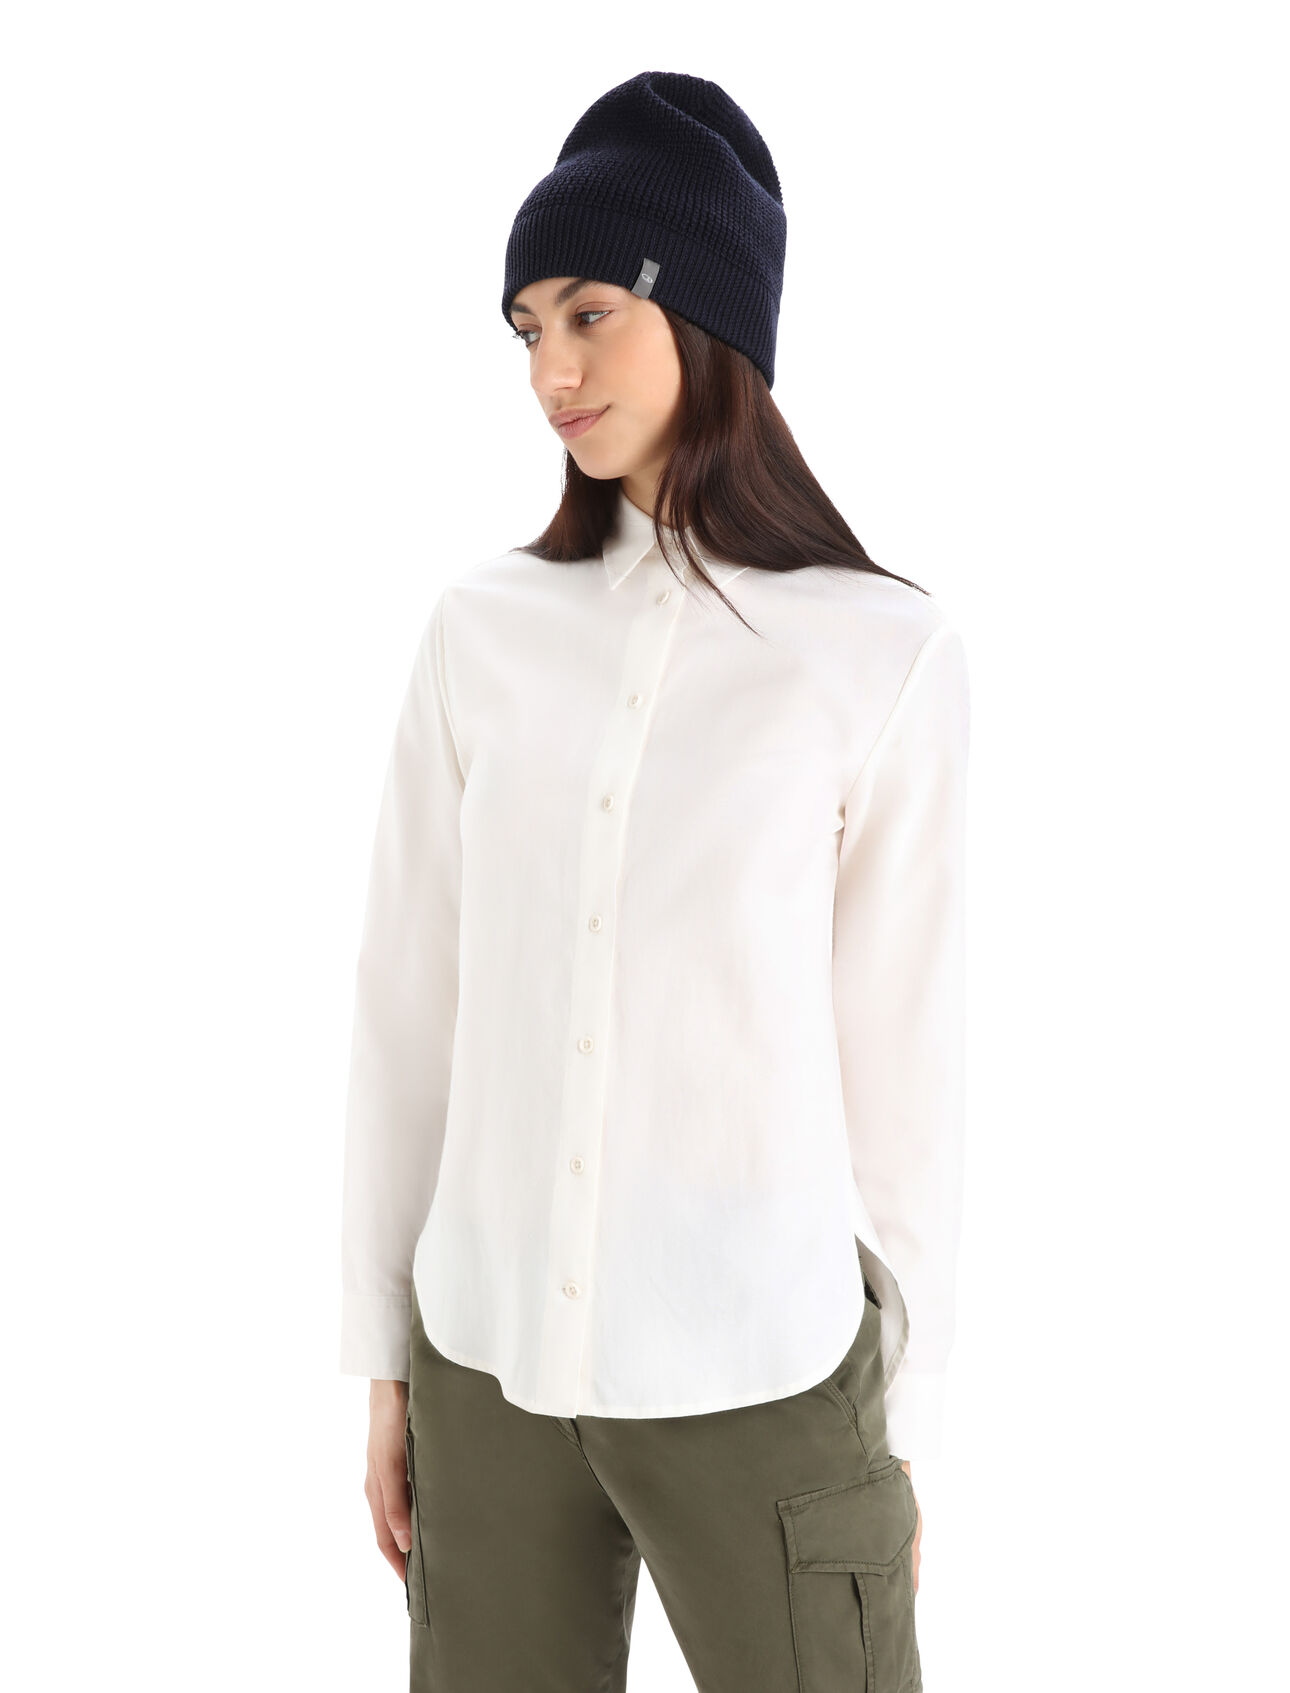 Womens Merino Berlin Long Sleeve Shirt A classic, relaxed-fit collared shirt for everyday comfort, the Berlin Long Sleeve Shirt feature a durable and sustainable blend of all natural merino wool and organic cotton.